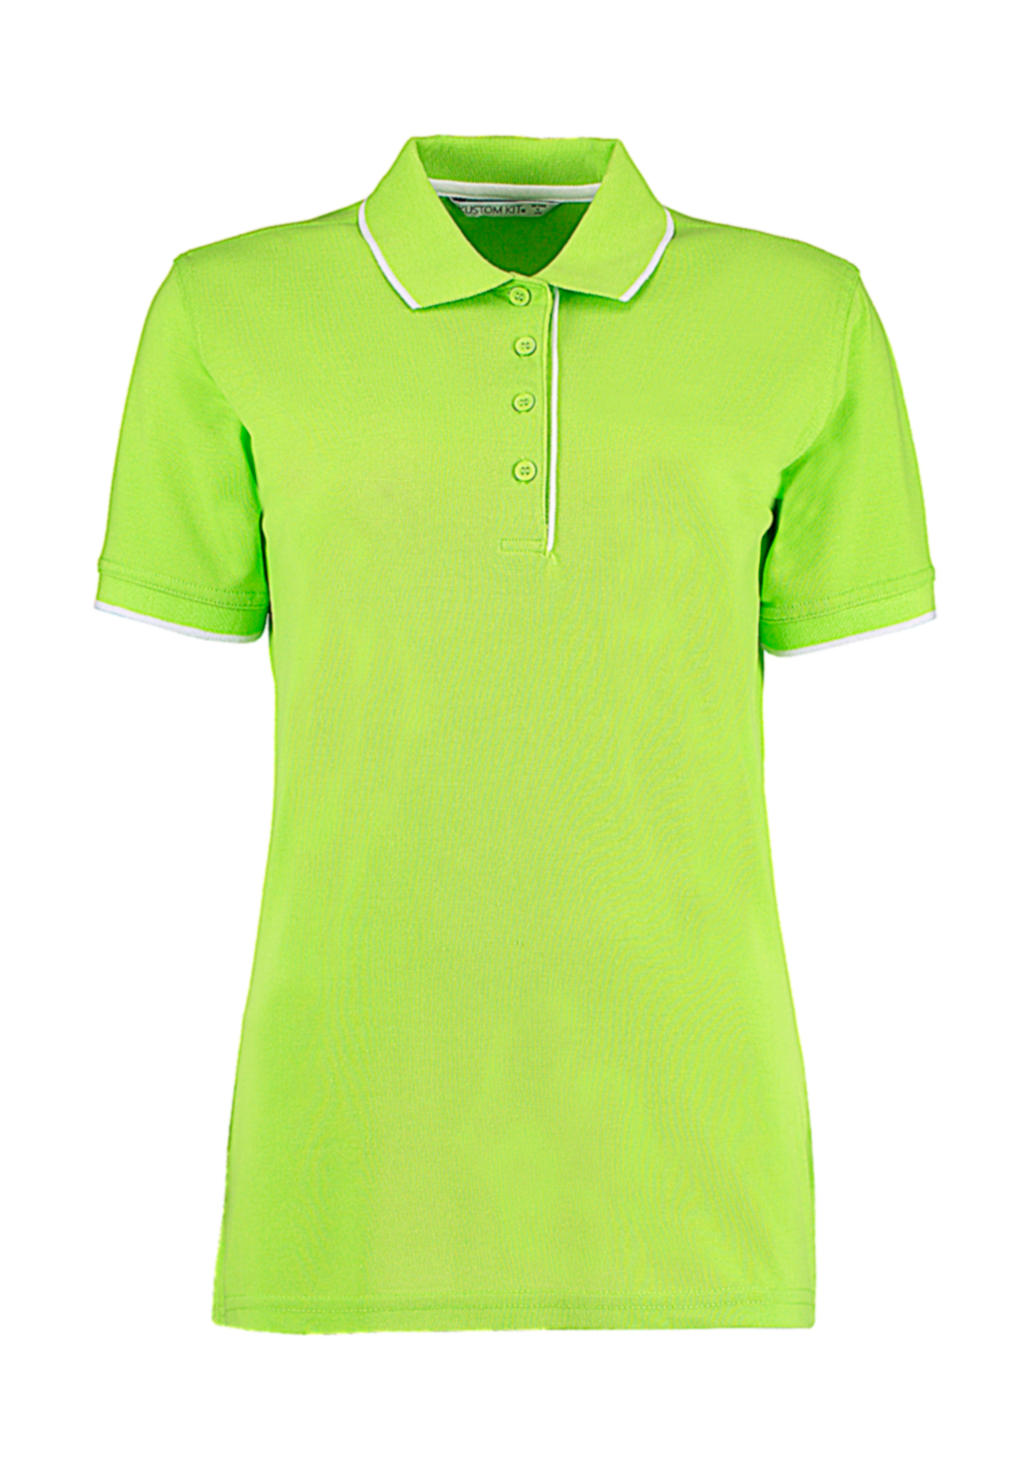  Womens Classic Fit Essential Polo in Farbe Lime/White